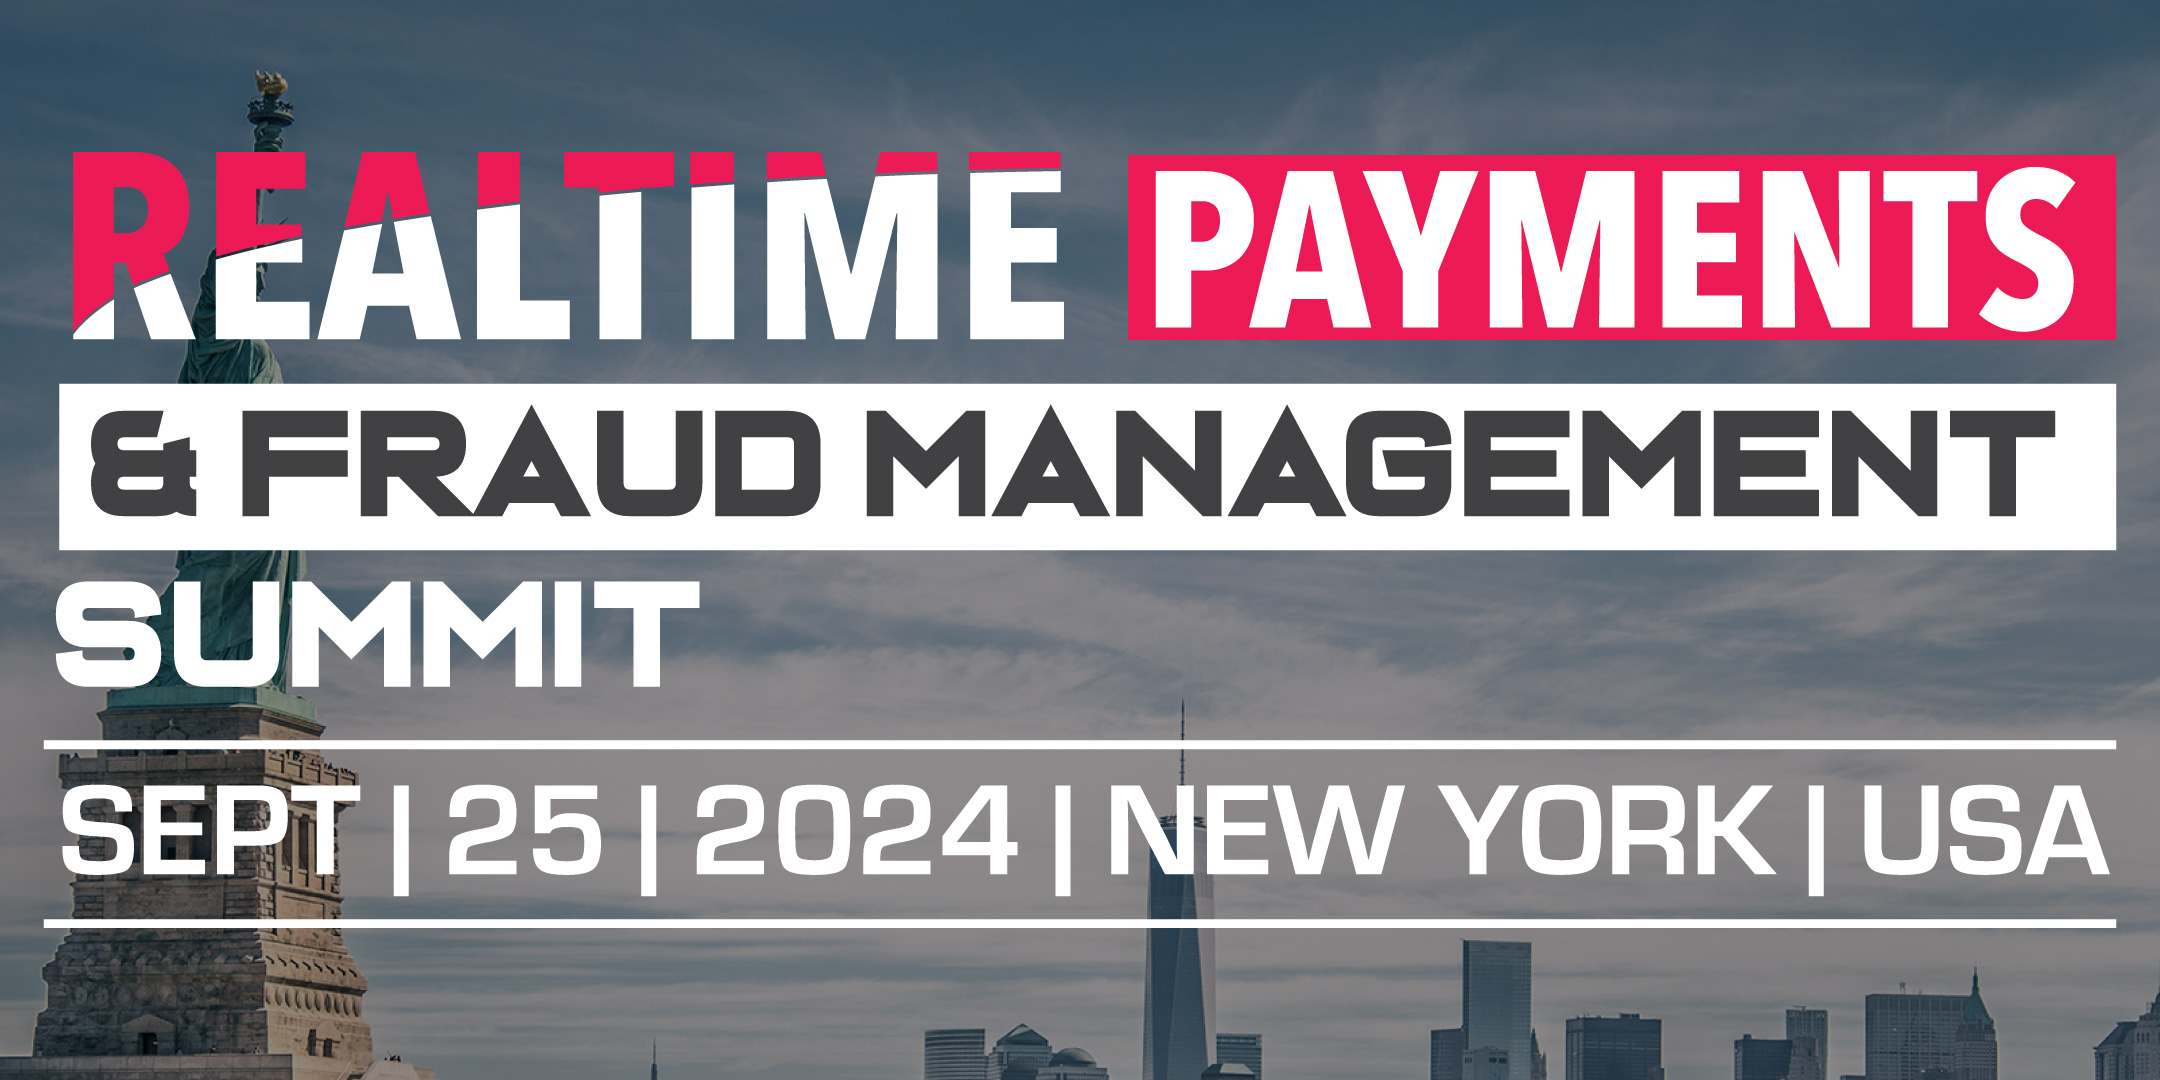 REAL TIME PAYMENTS & FRAUD MANAGEMENT SUMMIT (AMERICAS), New York, United States